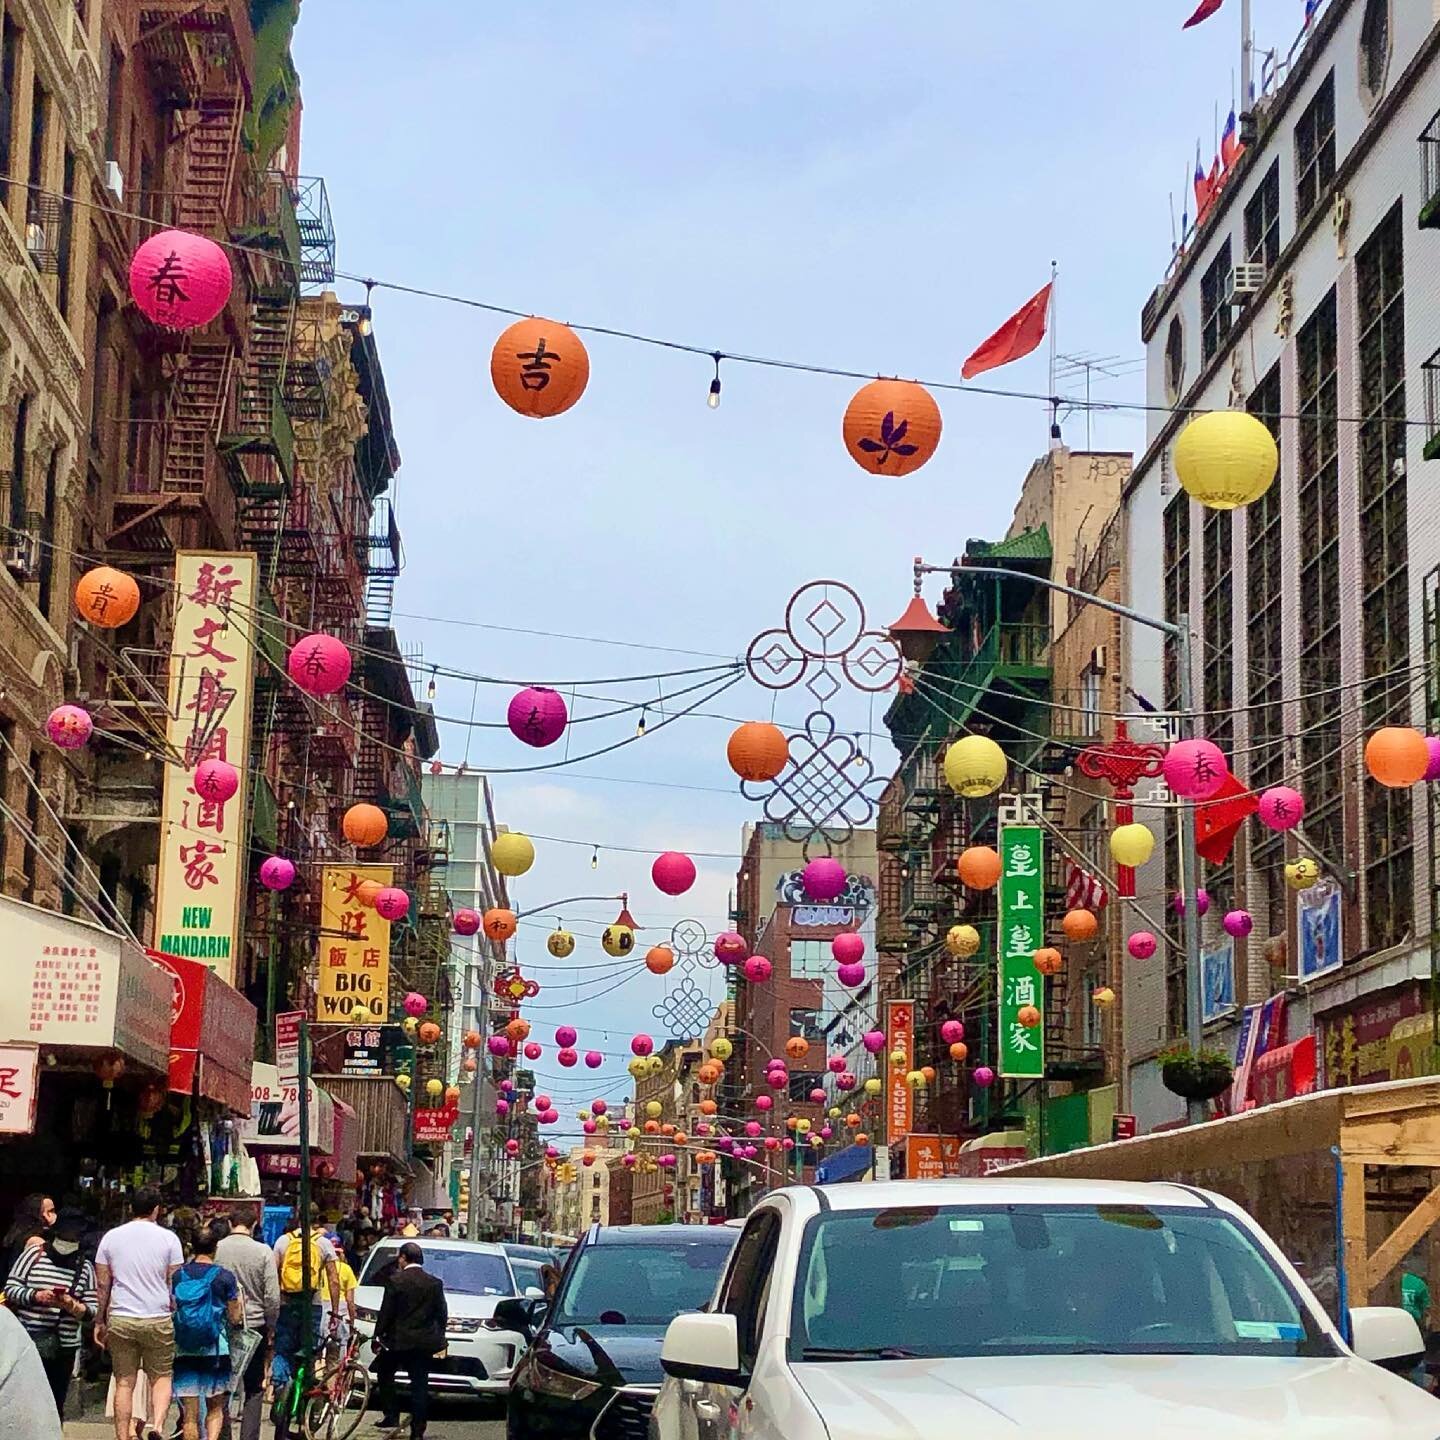 #DimSum in #Chinatown on a busy Sunday in #newyorkcity 🌆 The City is opening. #ComeVisit Hire a guide #newyorker #tourguide #walkingtour #history #art #architecture #food